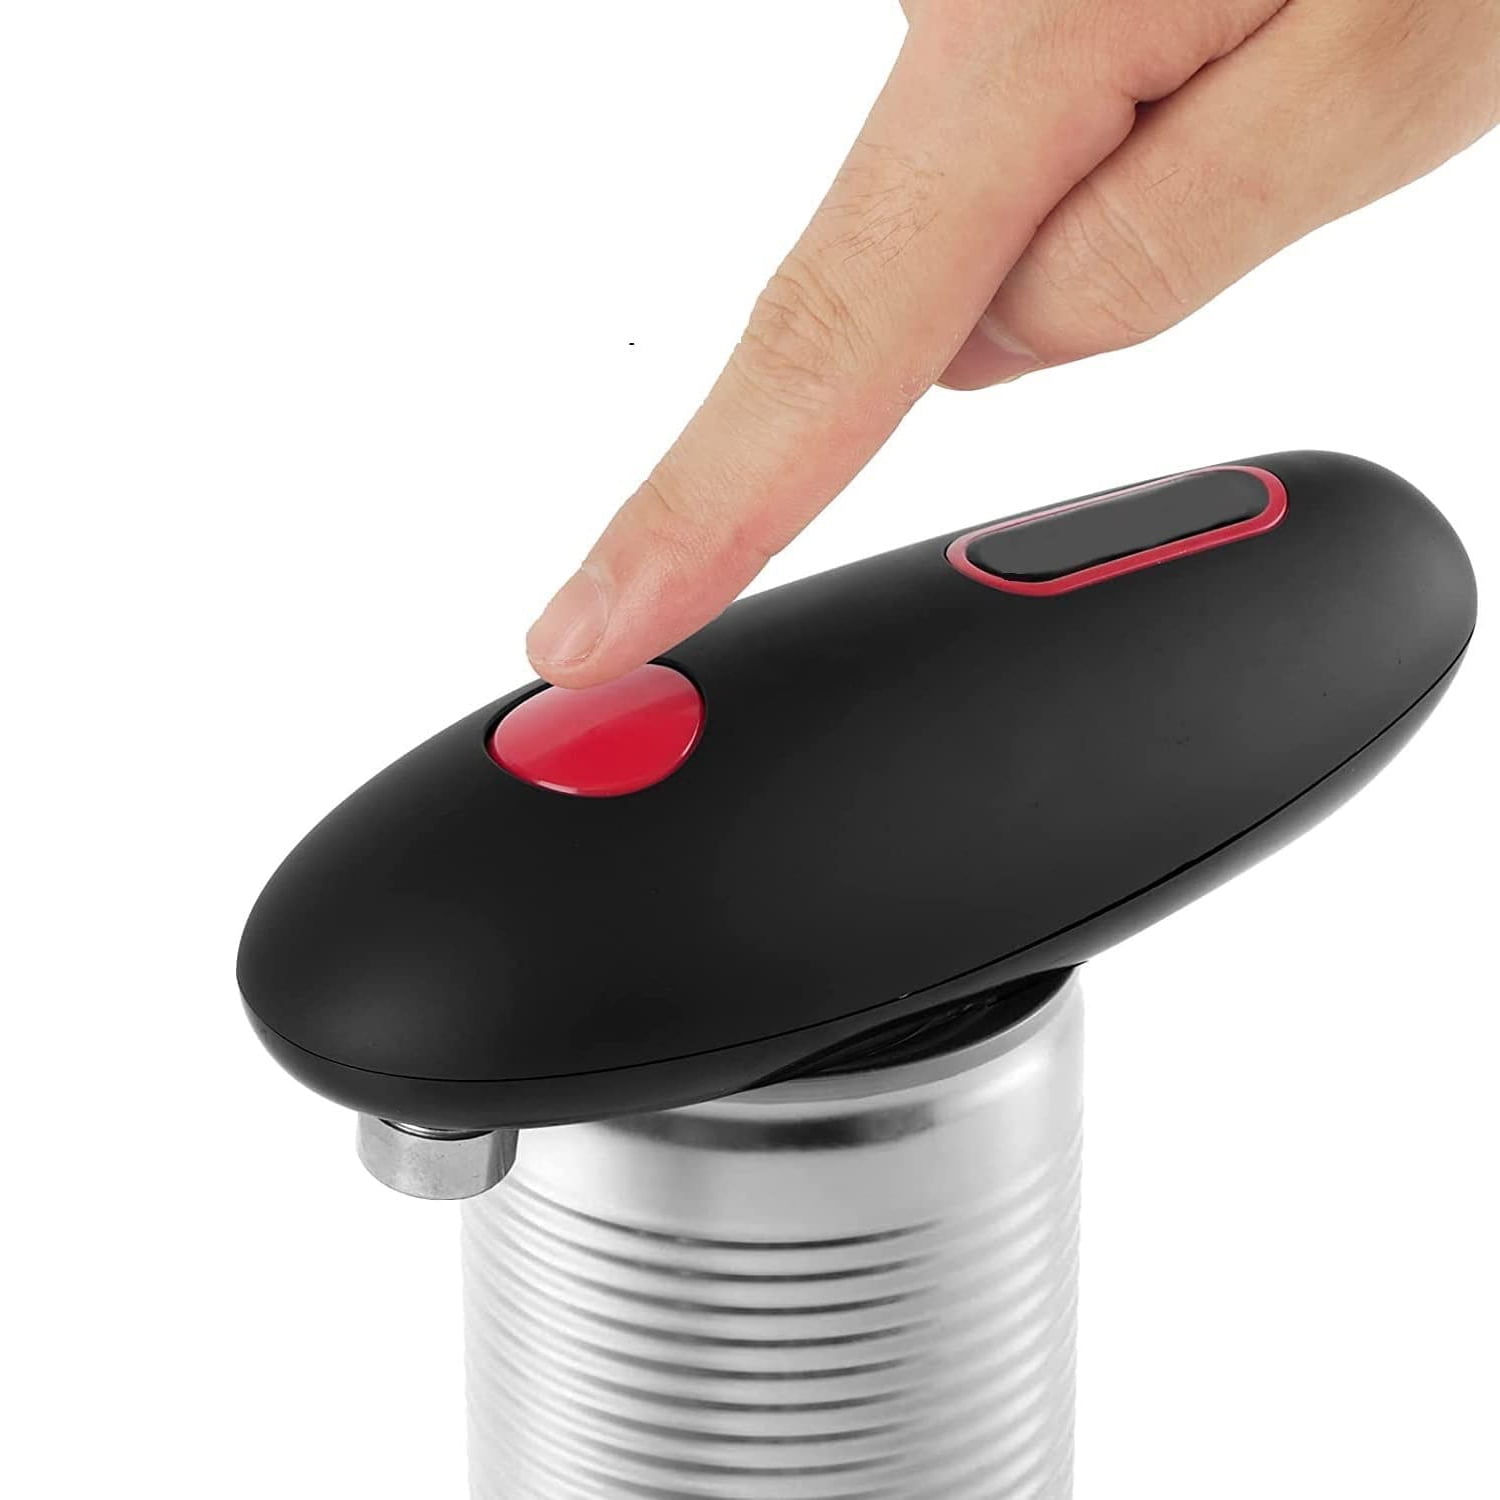 Dropship Kitchen Electric Can Opener; Open Your Cans With A Simple Push Of  Button - Smooth Edge; Food-Safe And Battery Operated Handheld Can Opener to  Sell Online at a Lower Price